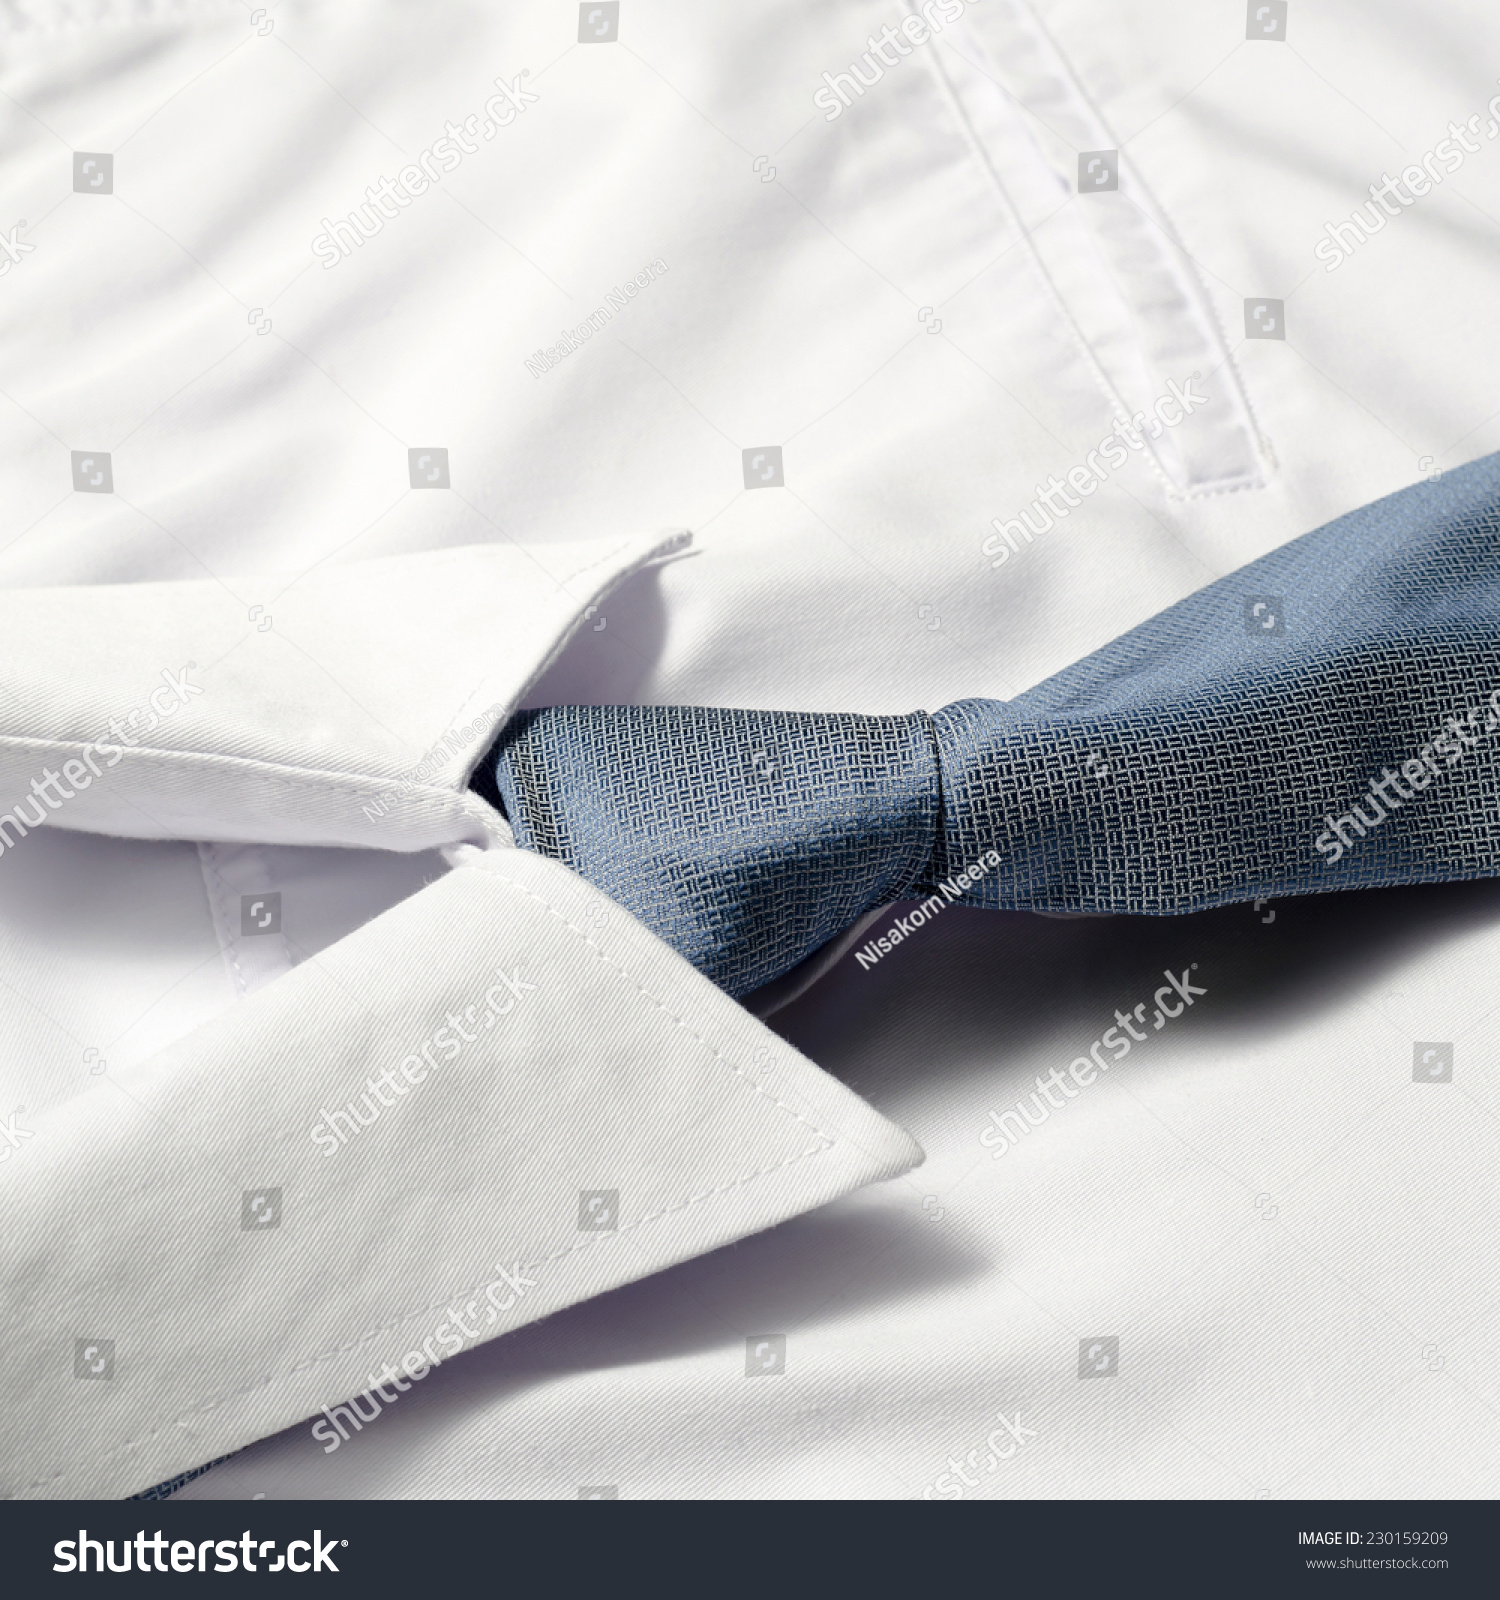 cloth white shirt with blue neck tie #230159209